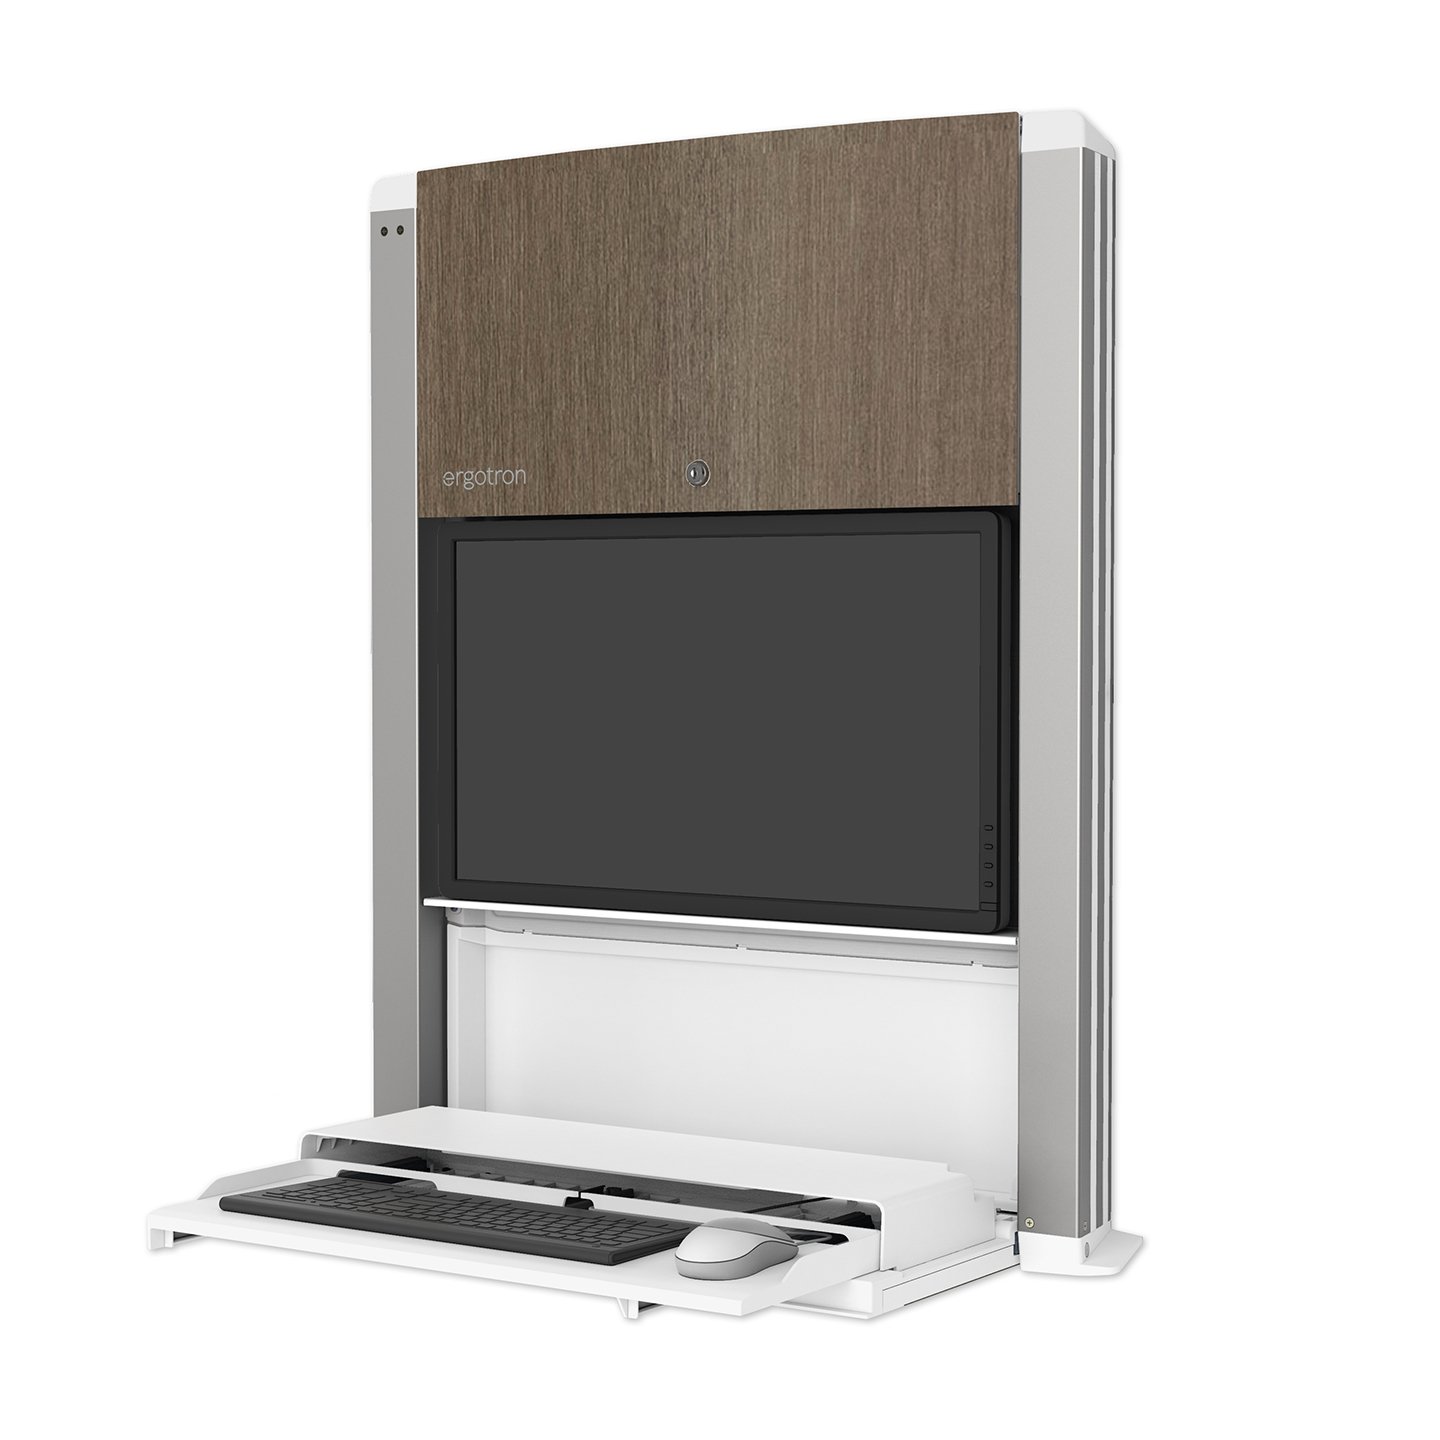 Haworth Carefit Enclosure Workspace opened up in wood finish with keyboard and mouse out